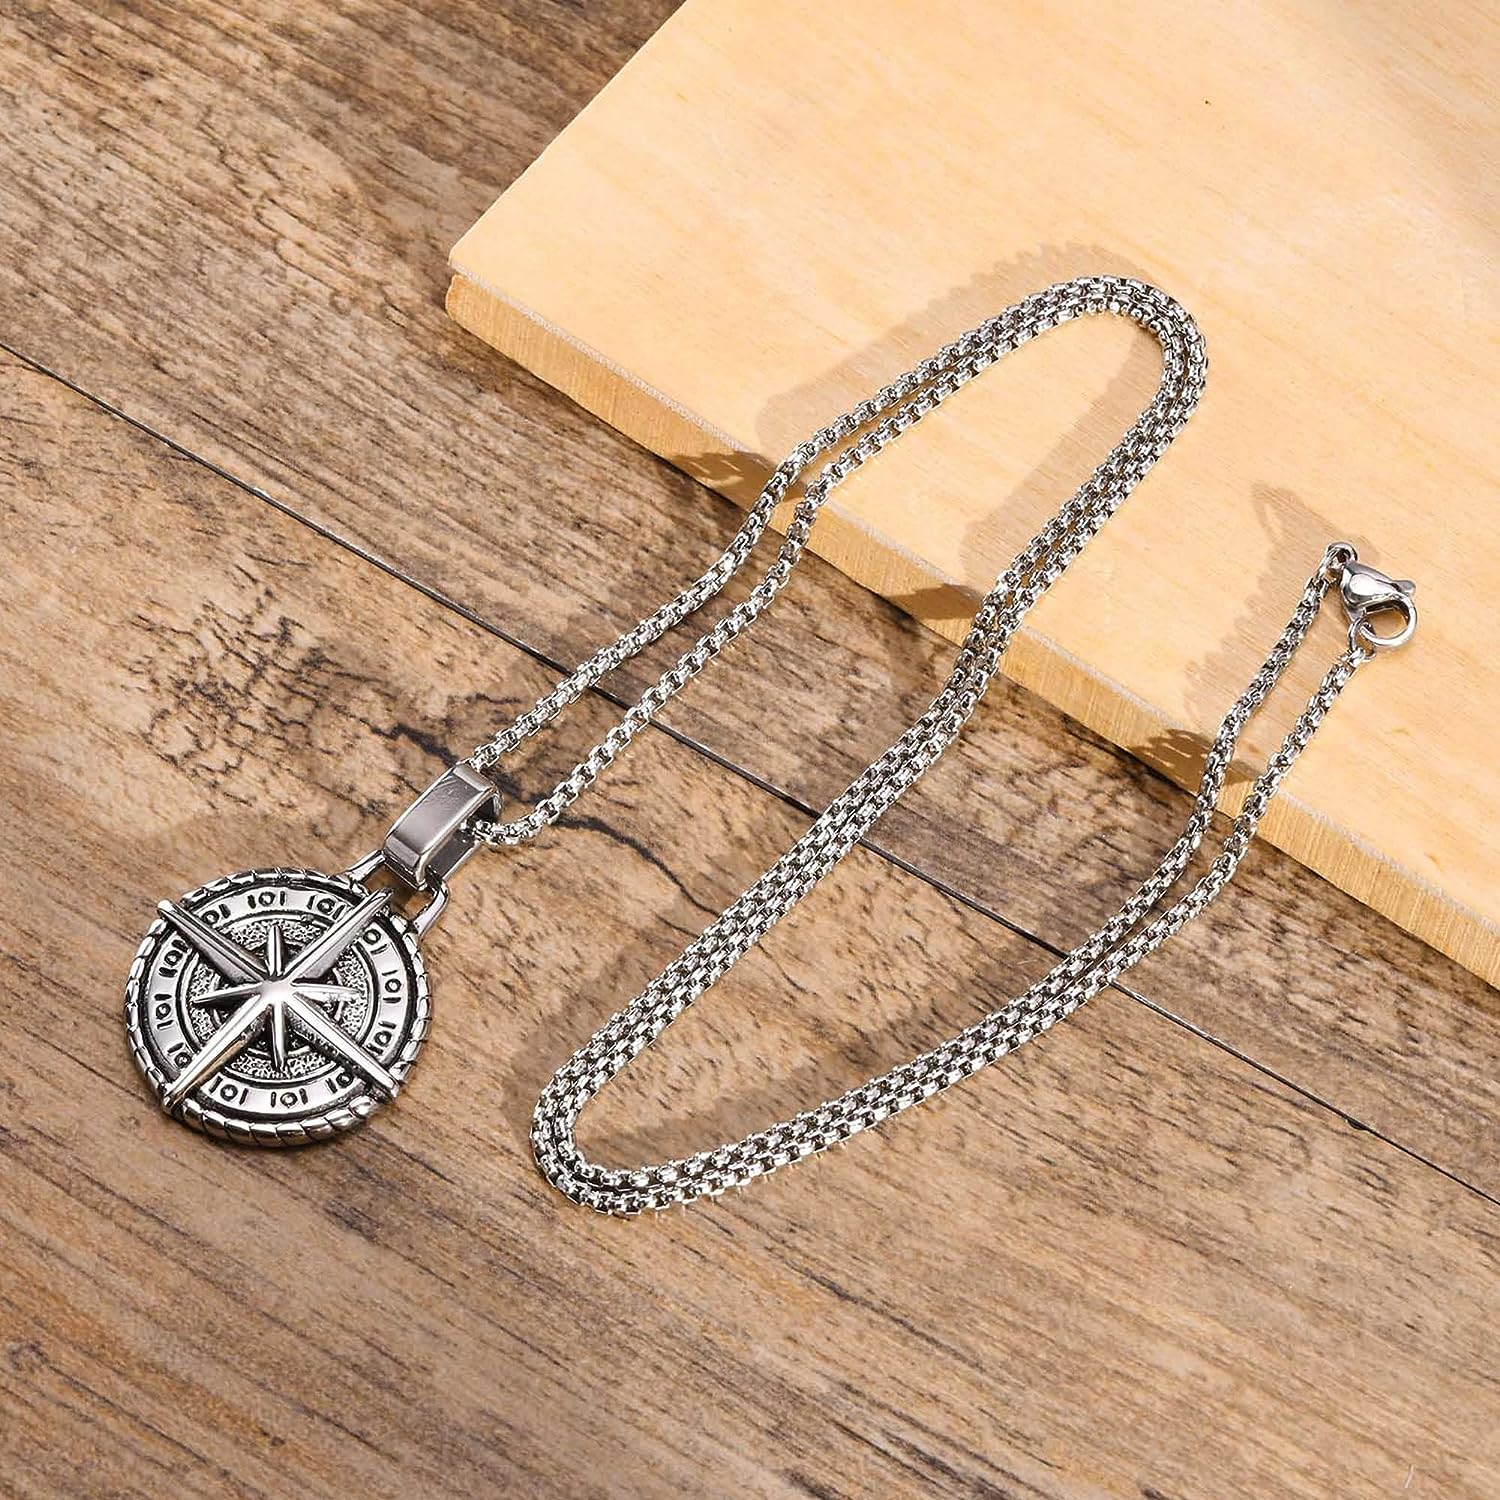 Oxidised Round Pendant Cross Compass Necklace Chain